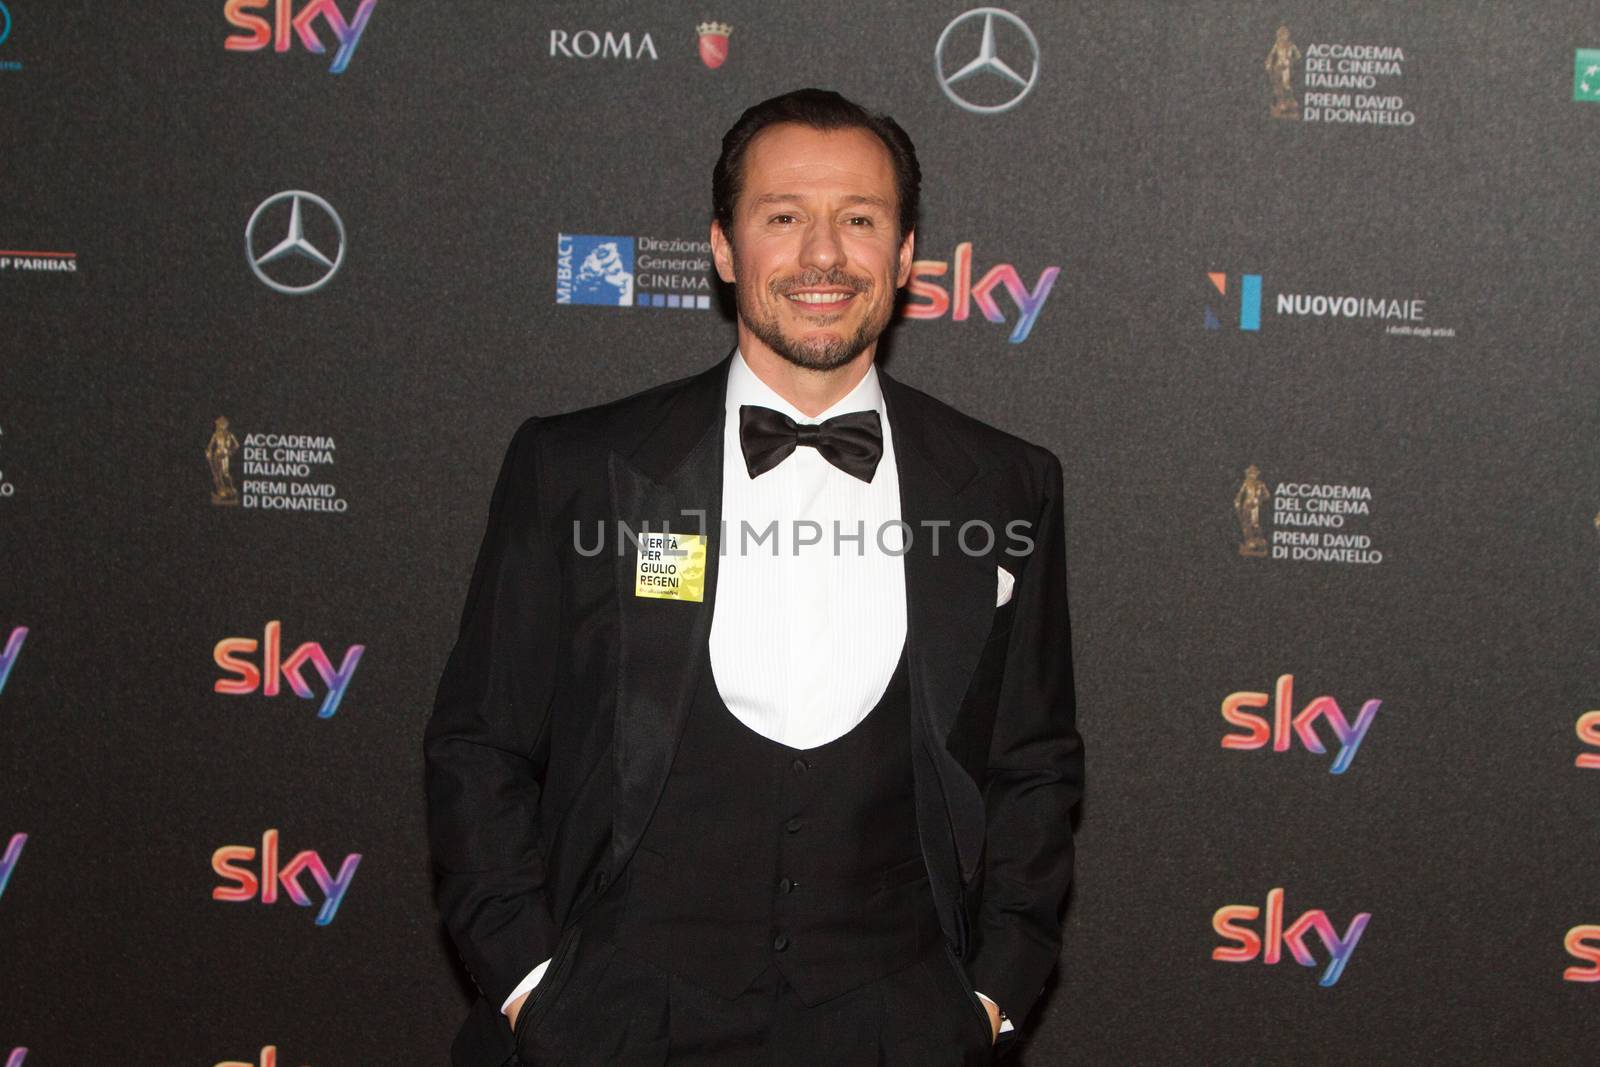 ITALY, Rome: Actor Stefano Accorsi attends to the red carpet of David di Donatello awards ceremony on April, 18, 2016 in Rome, Italy.